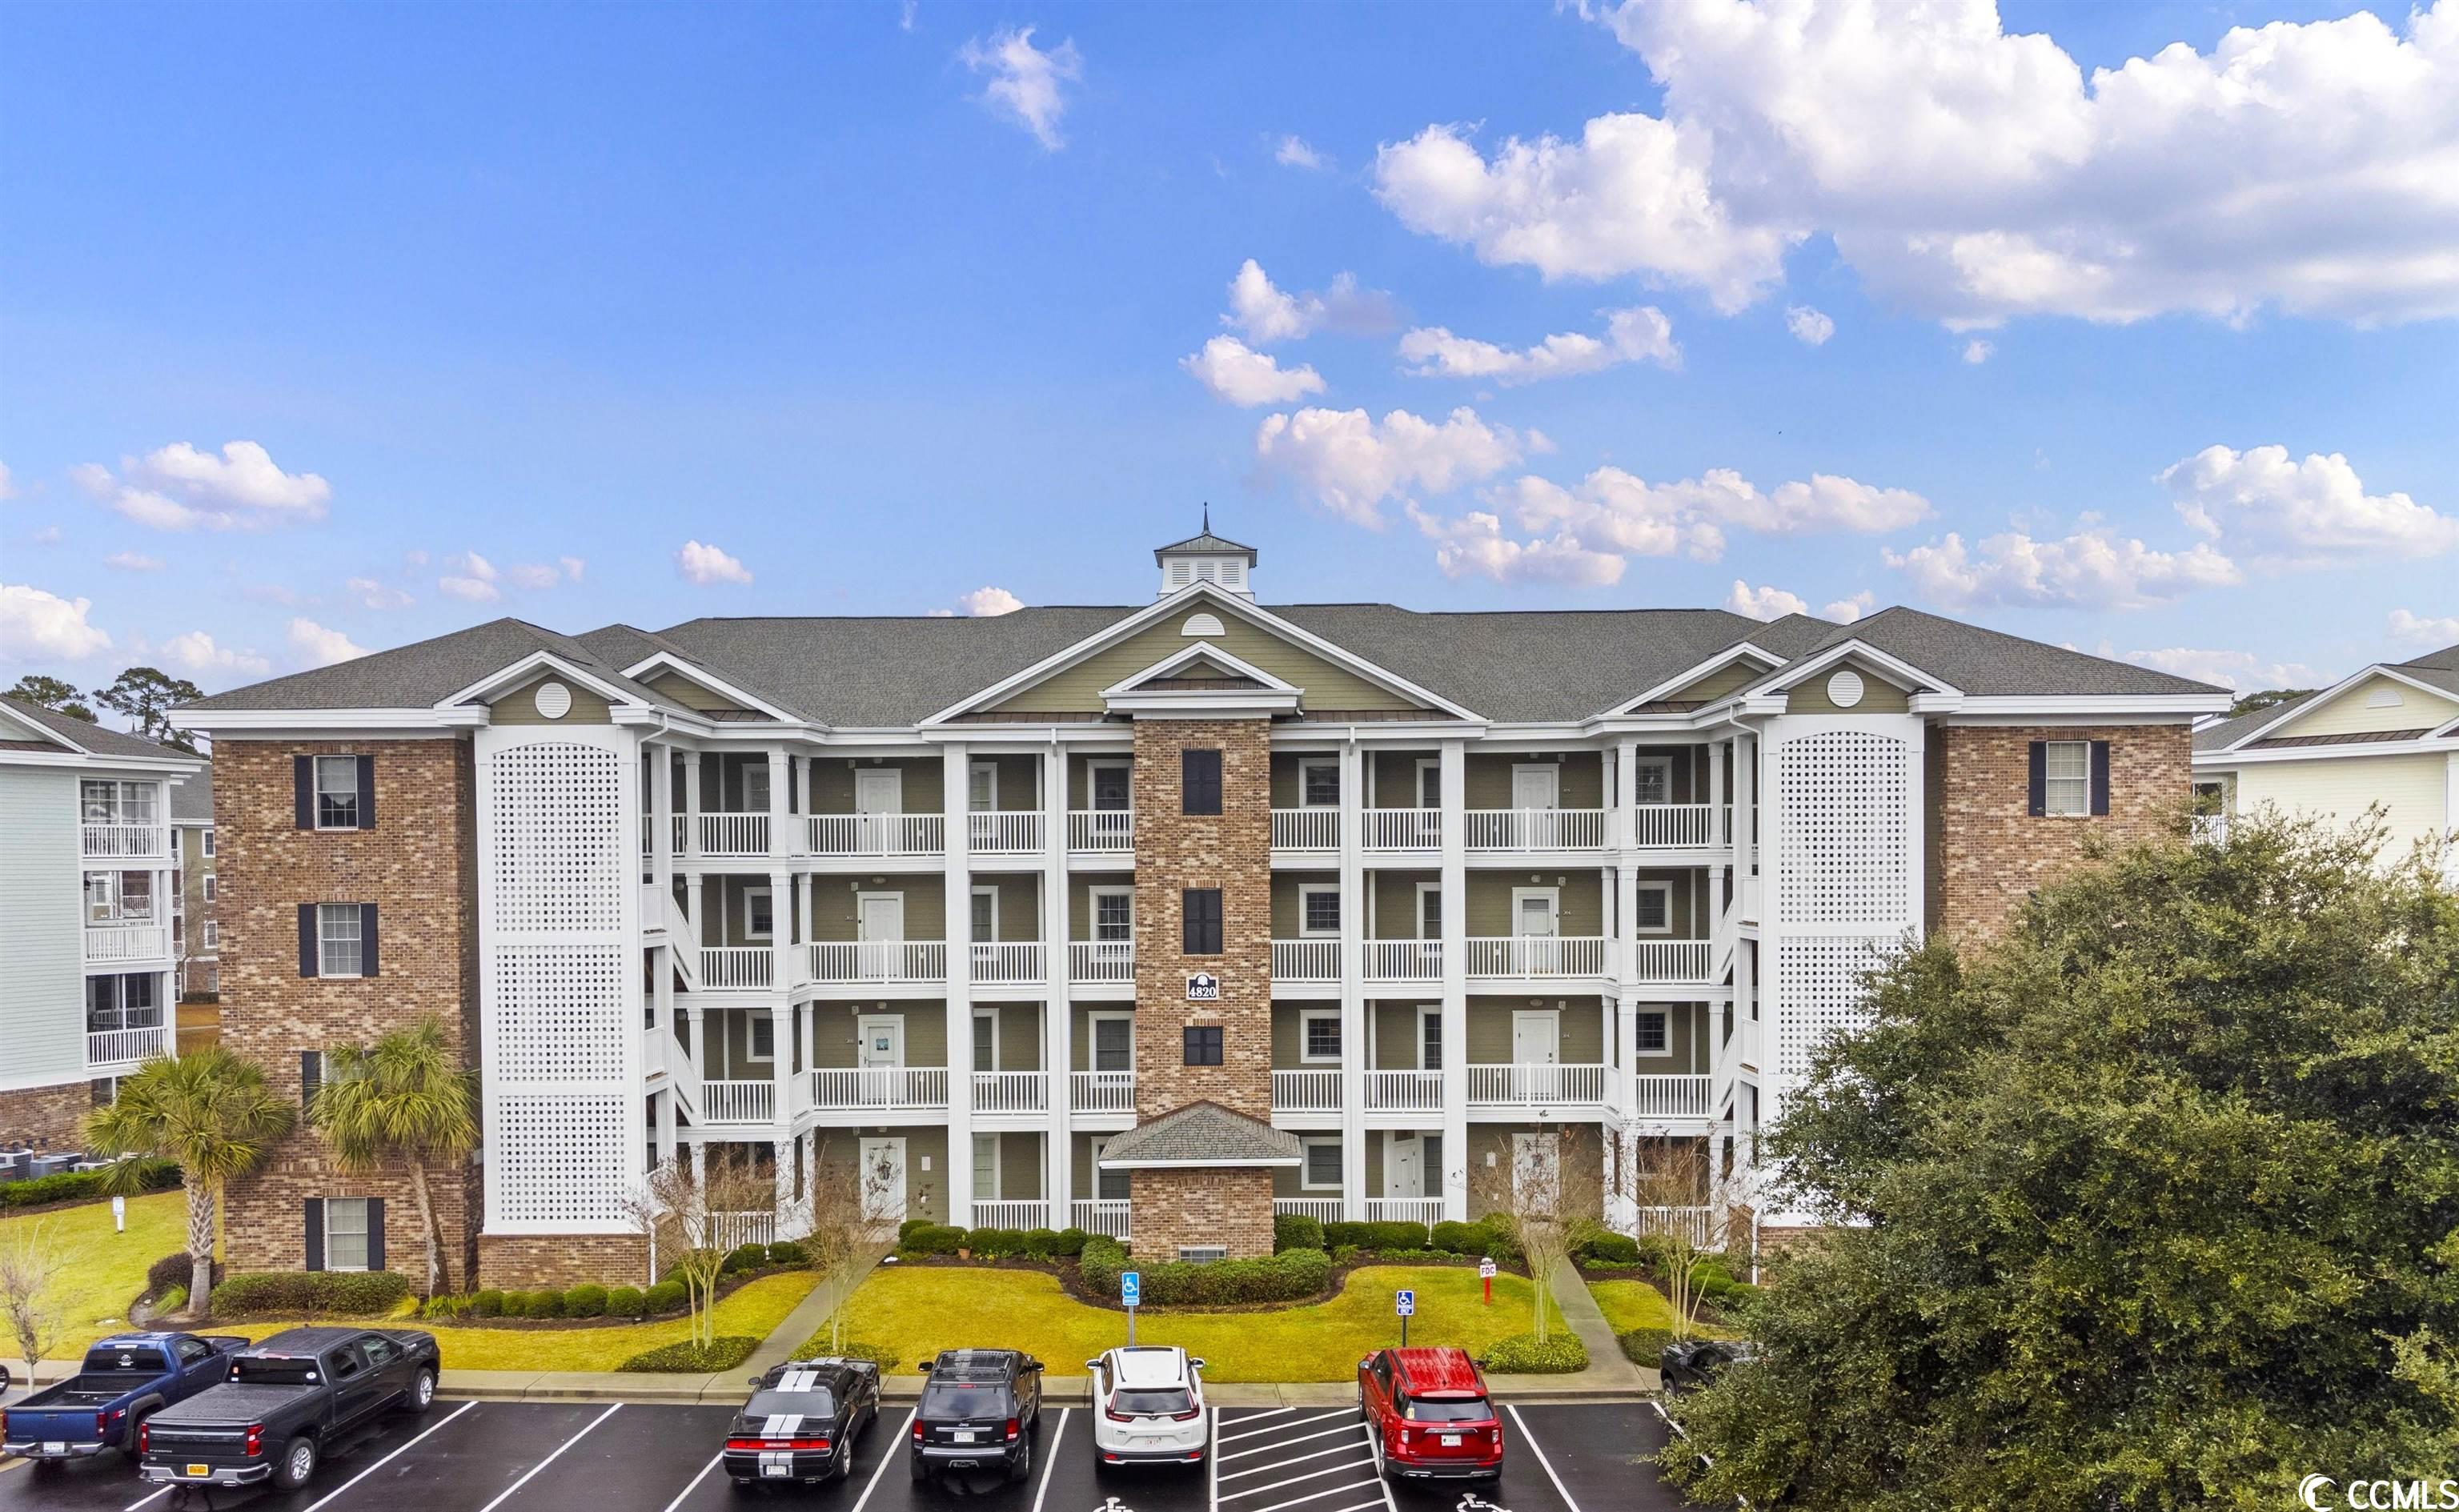 myrtle beach condo - welcome to magnolia pointe - end unit! - 3br, 2ba, 1,400+-sf, 3rd level, common elevator service! one of the most sought after communities in the area! this totally transitional condo is a stylish combination of dining, living & kitchen space united perfectly together w/wood ltv & 12in tile floors, crown moldings, stainless steel appl & stylish paint & decor'. floorplan  includes a breakfast bar, bay window & sliding glass to beautiful coastal happenings. the primary br is sure to please w/generous space accommodating lrg furnishings, new carpets, 2 closets!, bay window, generous shower & bath combo, cultured marble double vanity & elegant tile floors. guest br1 is situated away from the primary br w/new carpets, single vanity, walk in shwr w/2 built in seats & laundry closet. guest br2 also features new carpets, double closets & generous space & privacy.  find refuge on breezy & hot summer nights w/your favorite drink on the cozy covered balcony overlooking one of four community ponds.  the property has been meticulously maintained & furnished perfectly themed w/elegance & style. magnolia pointe has 44 buildings with 830 individual units on 52 acres and is golf cart friendly.  enjoy any of the 7 community pools and 2 club houses. minutes from shopping & resturants and world class golf. seller never rented or leased! ***seller has a garage (28-f) that is being sold separately- mls 240215.